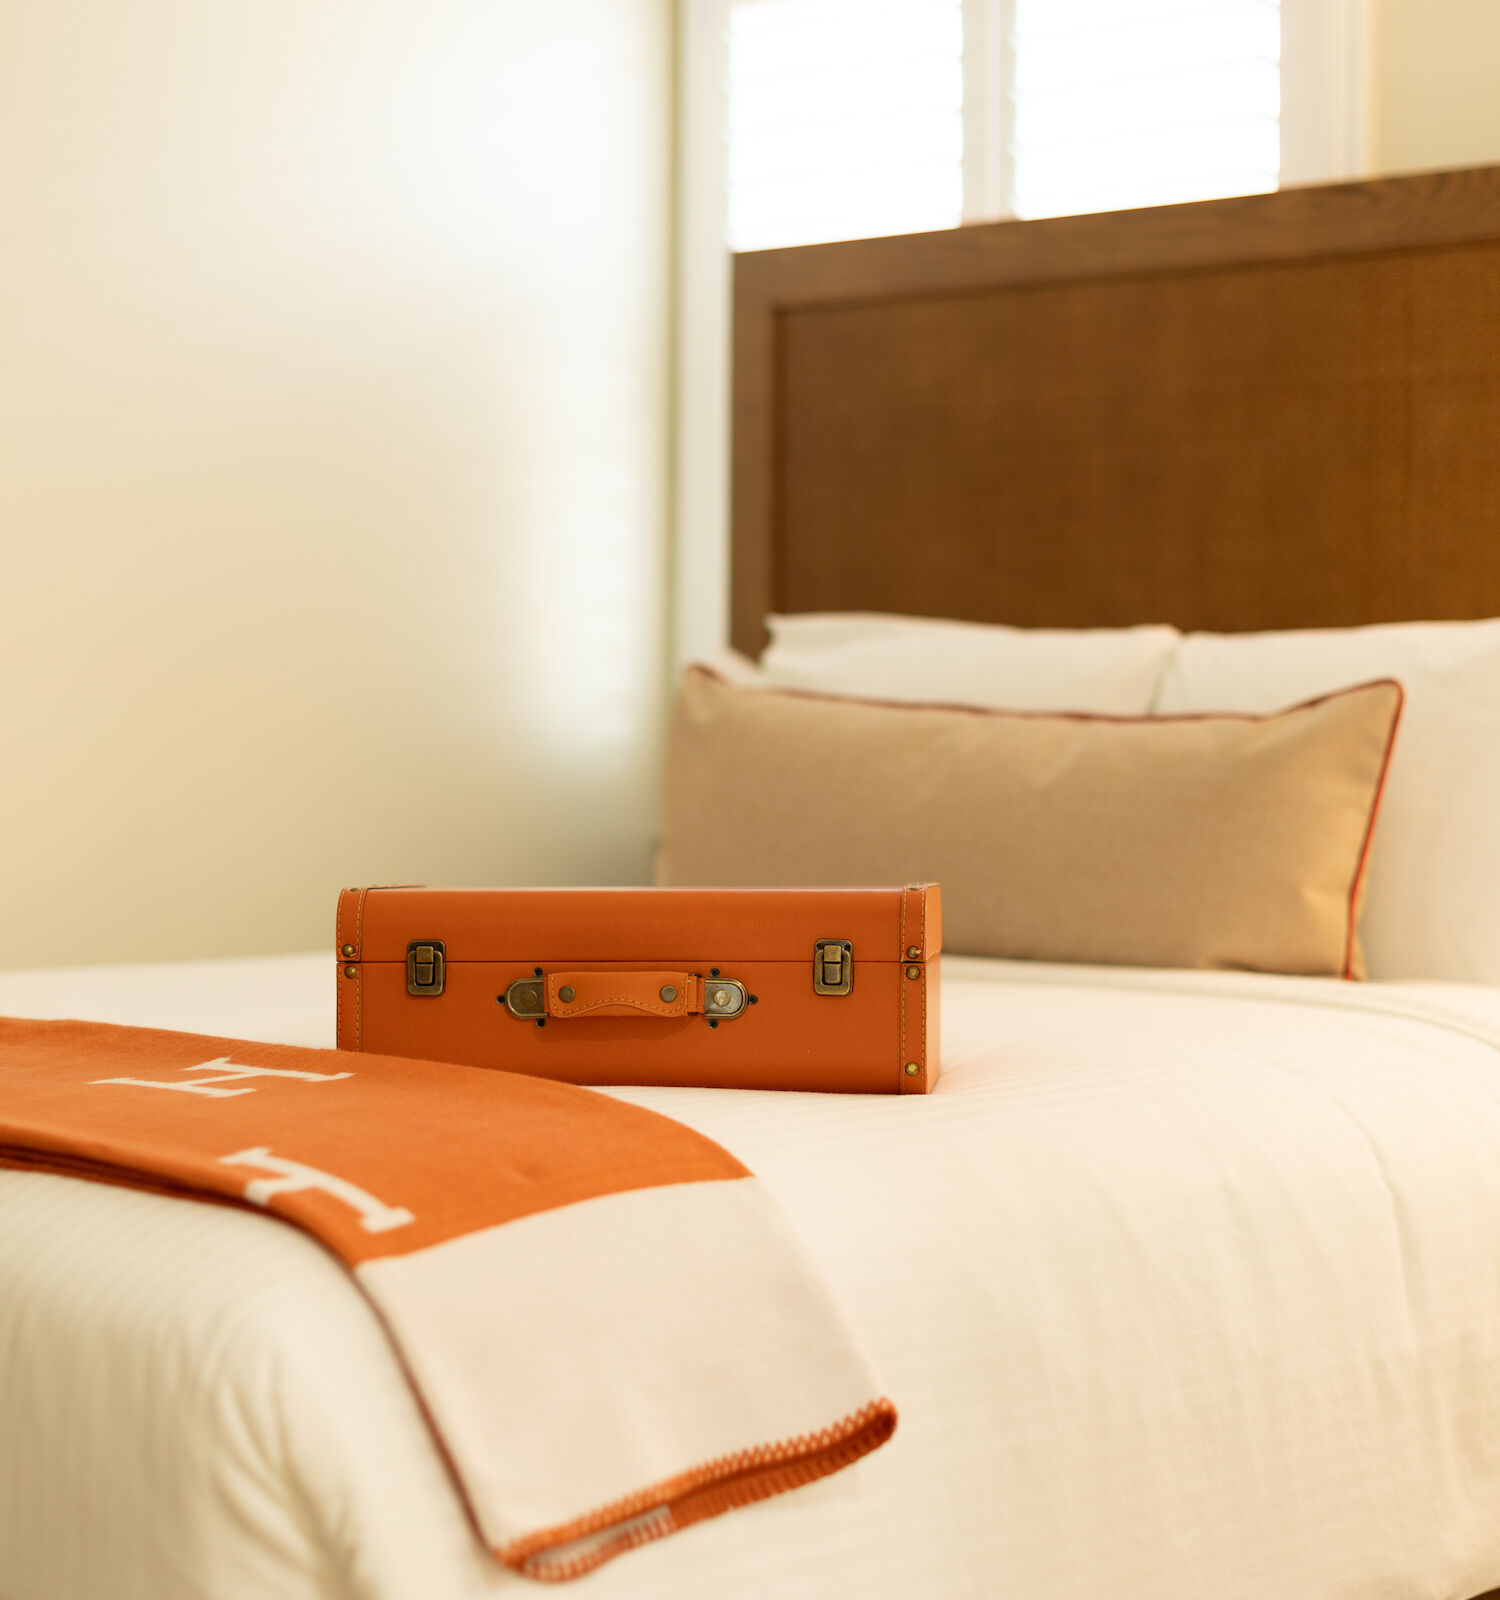 A cozy bed with white linens, an orange and white blanket, and a small orange suitcase placed on top.